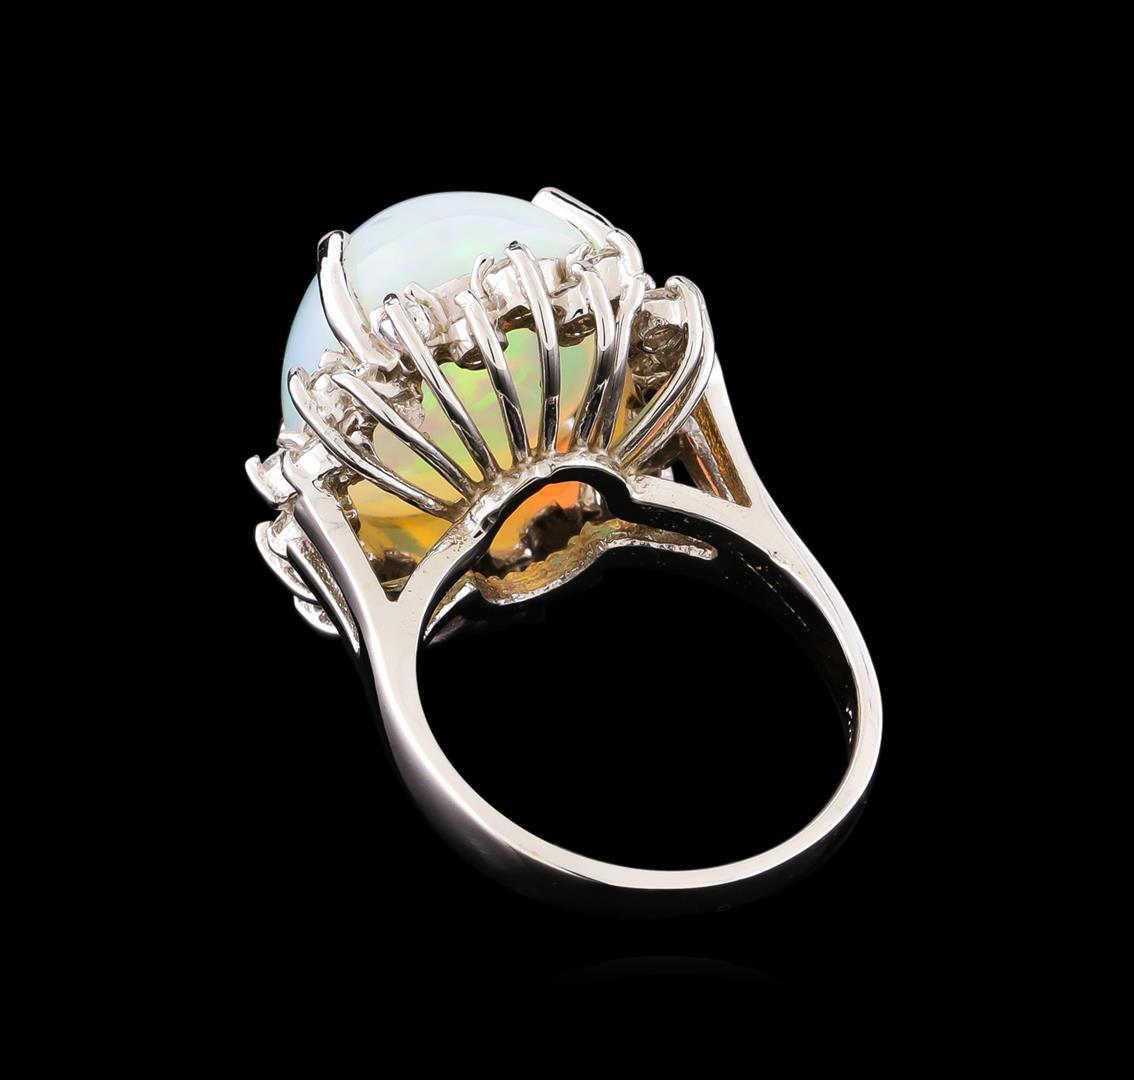 8.18 ctw Opal and Diamond Ring - 14KT White Gold